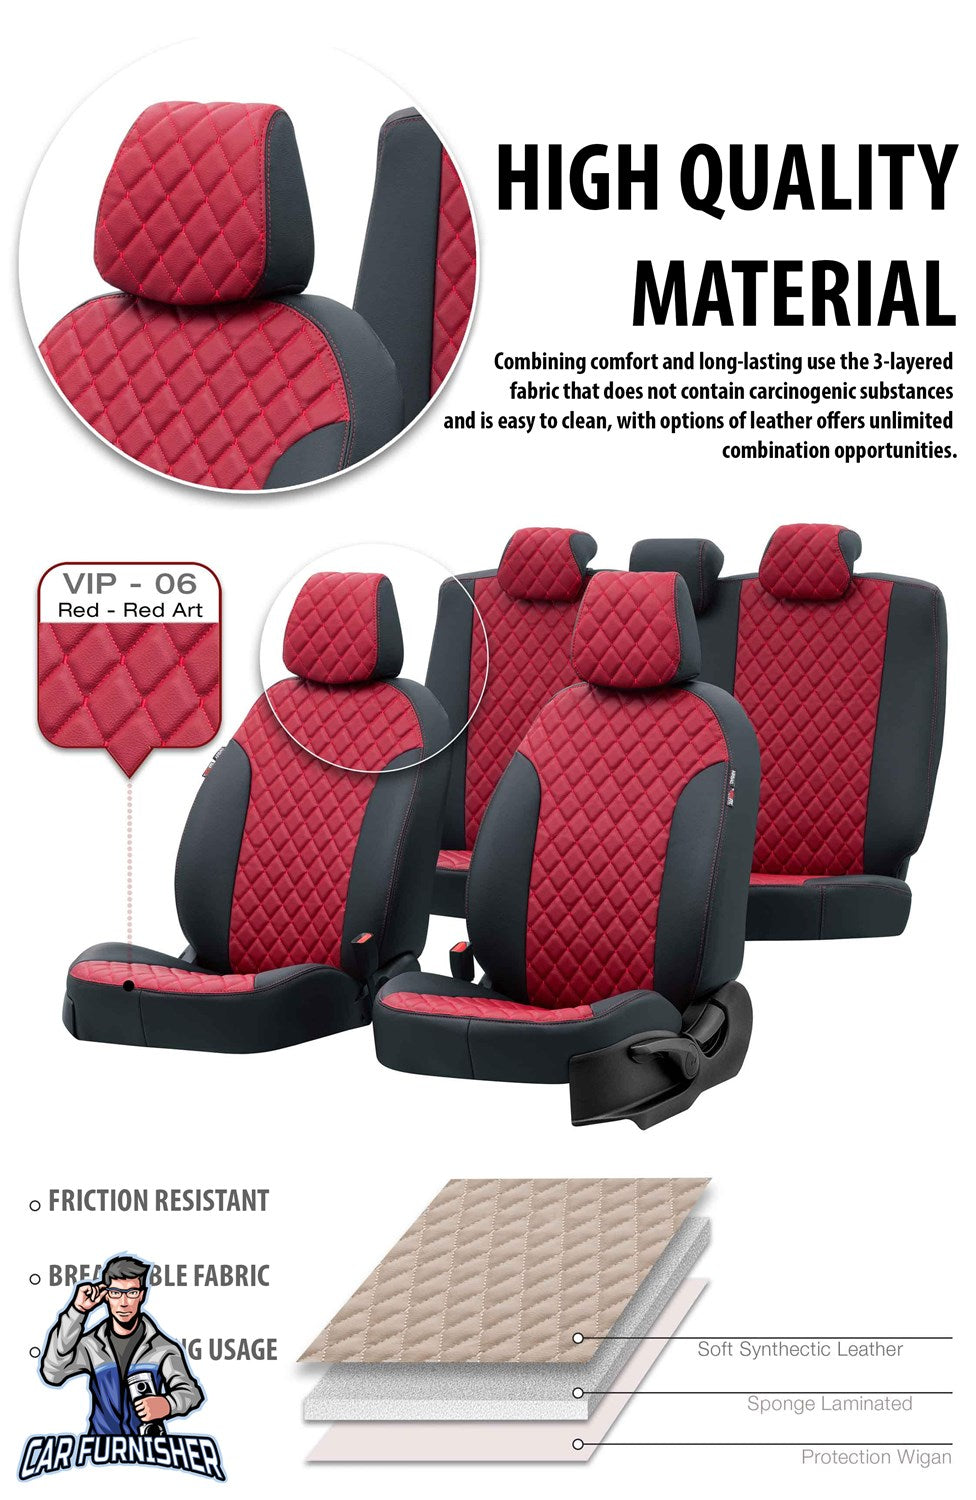 Kia Soul Seat Covers Madrid Leather Design Dark Red Leather